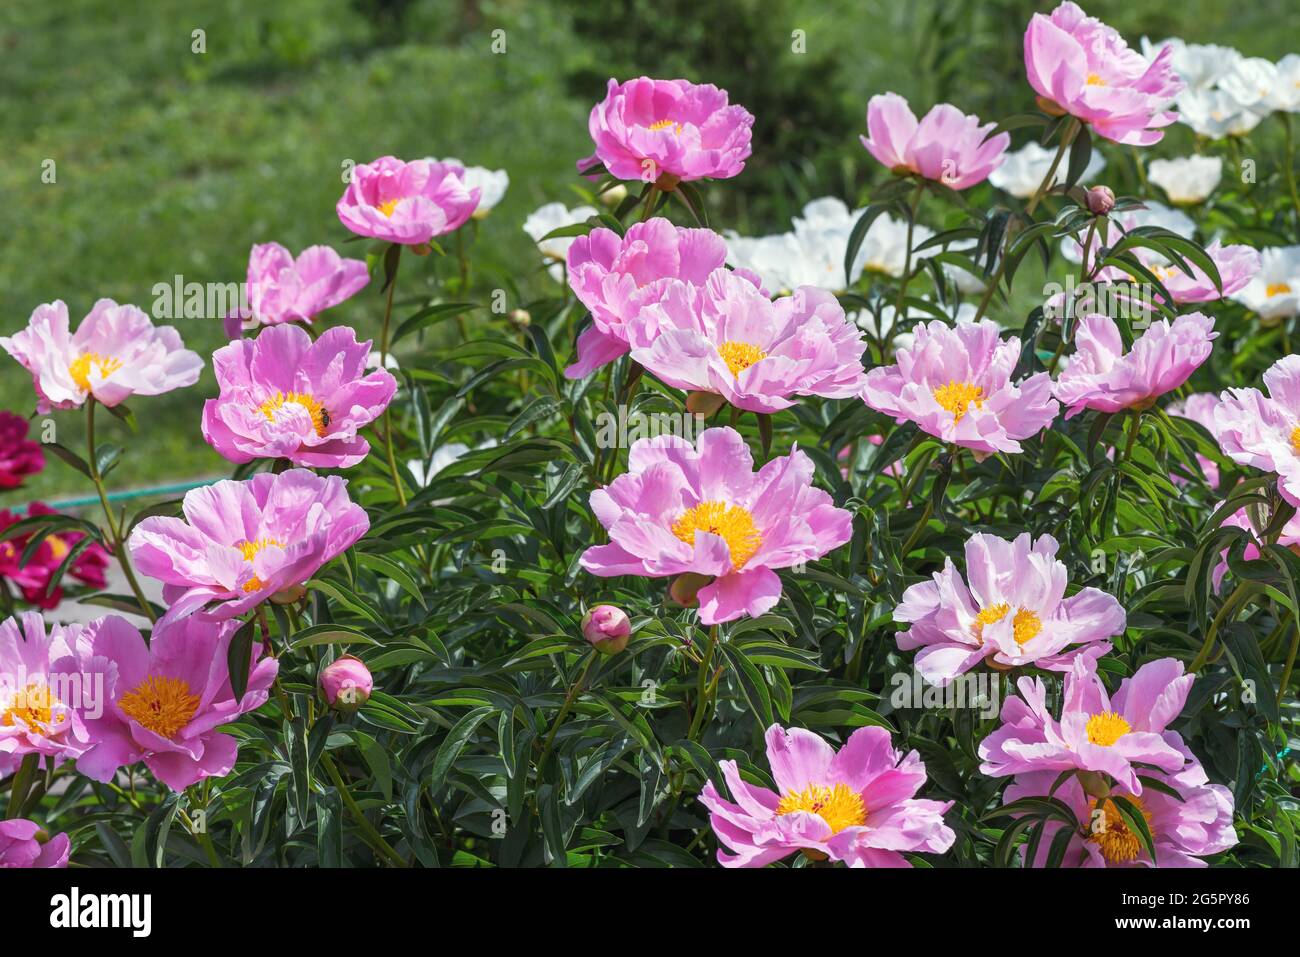 Herbaceous peonies Lake of Silver. Carmine pink double flowers with silvery tips. Stock Photo